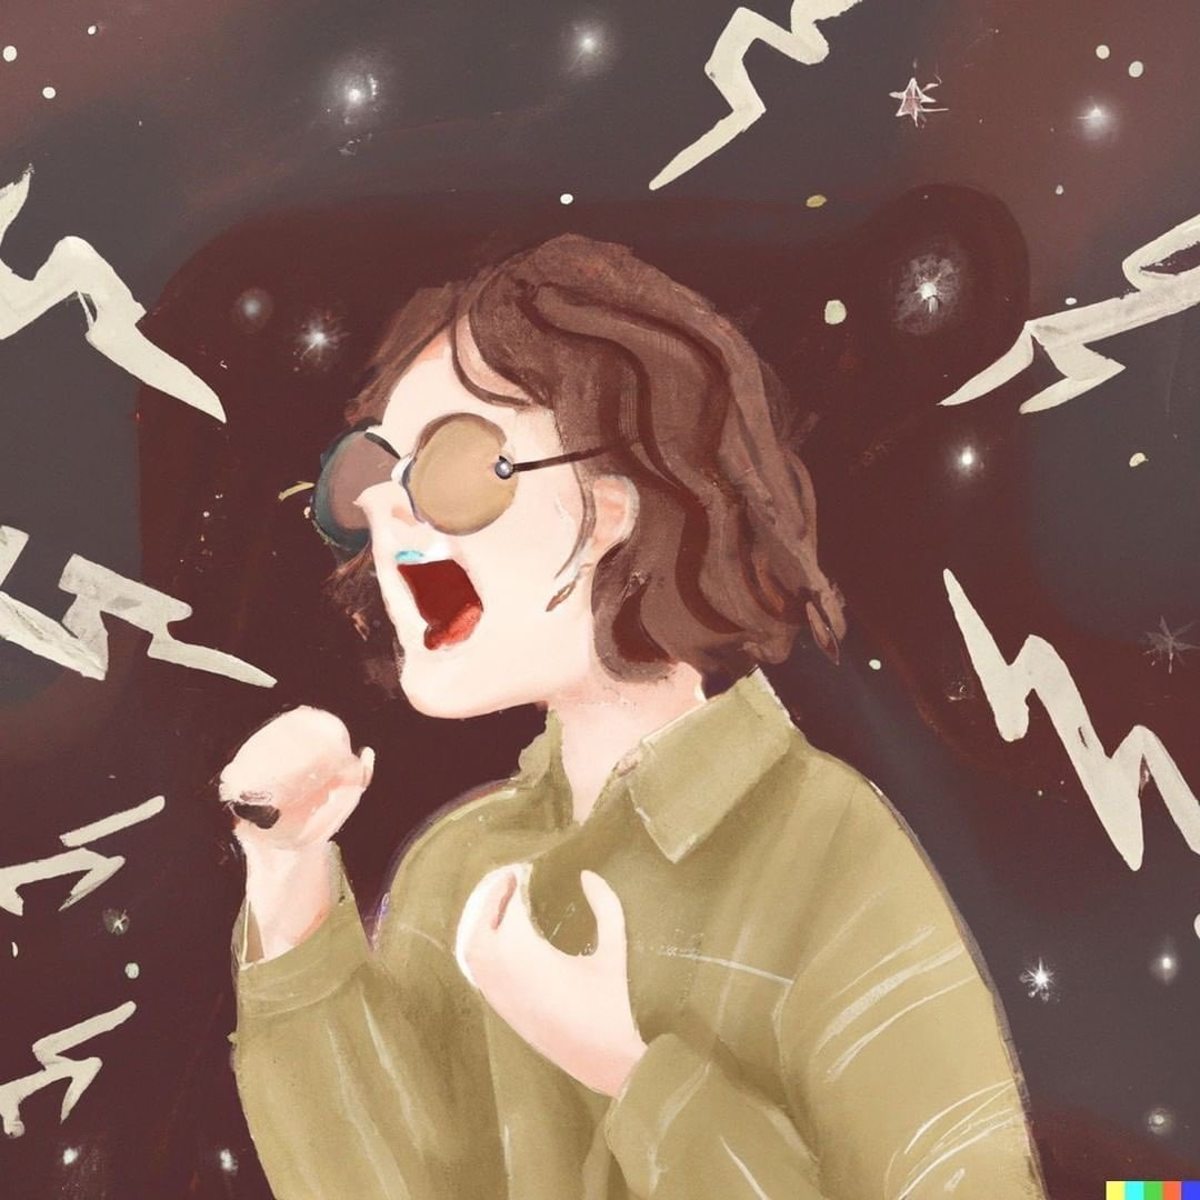 A brave young lady in deep pain, struggling to find herself while she sings, digital art  (Actual text prompt used)